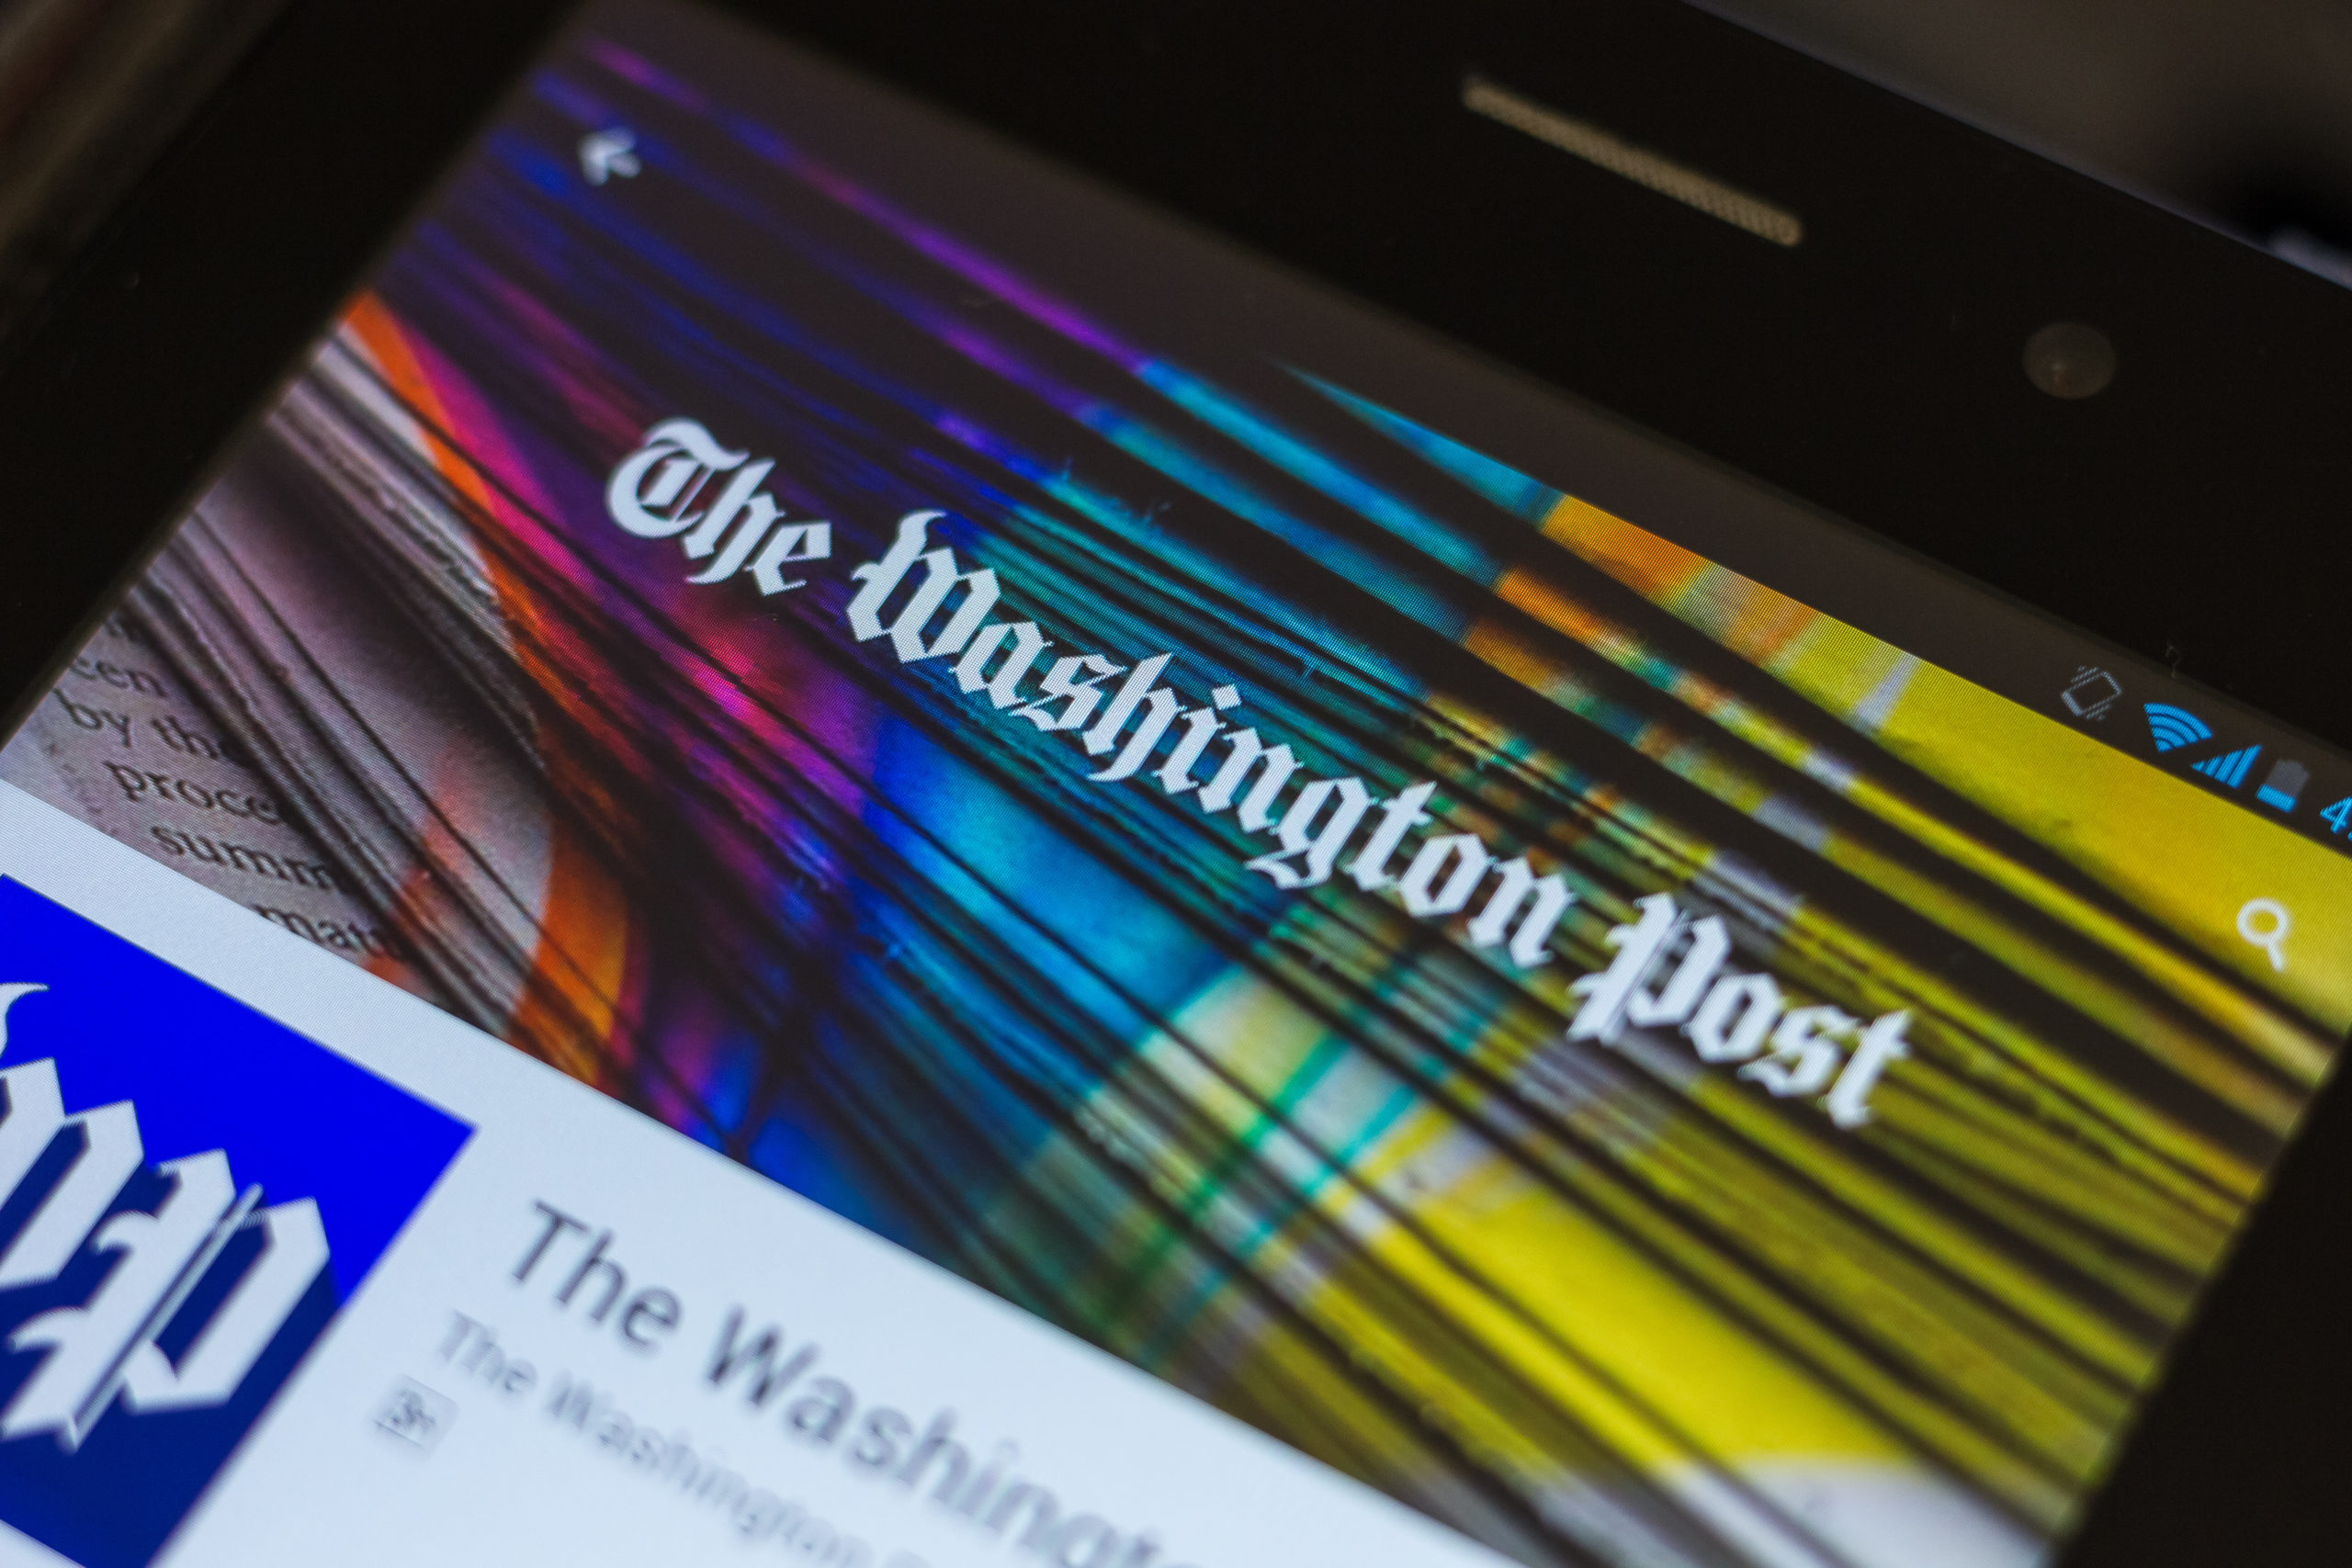 Ryazan, Russia – July 03, 2018: The Washington Post mobile app on the display of tablet PC.